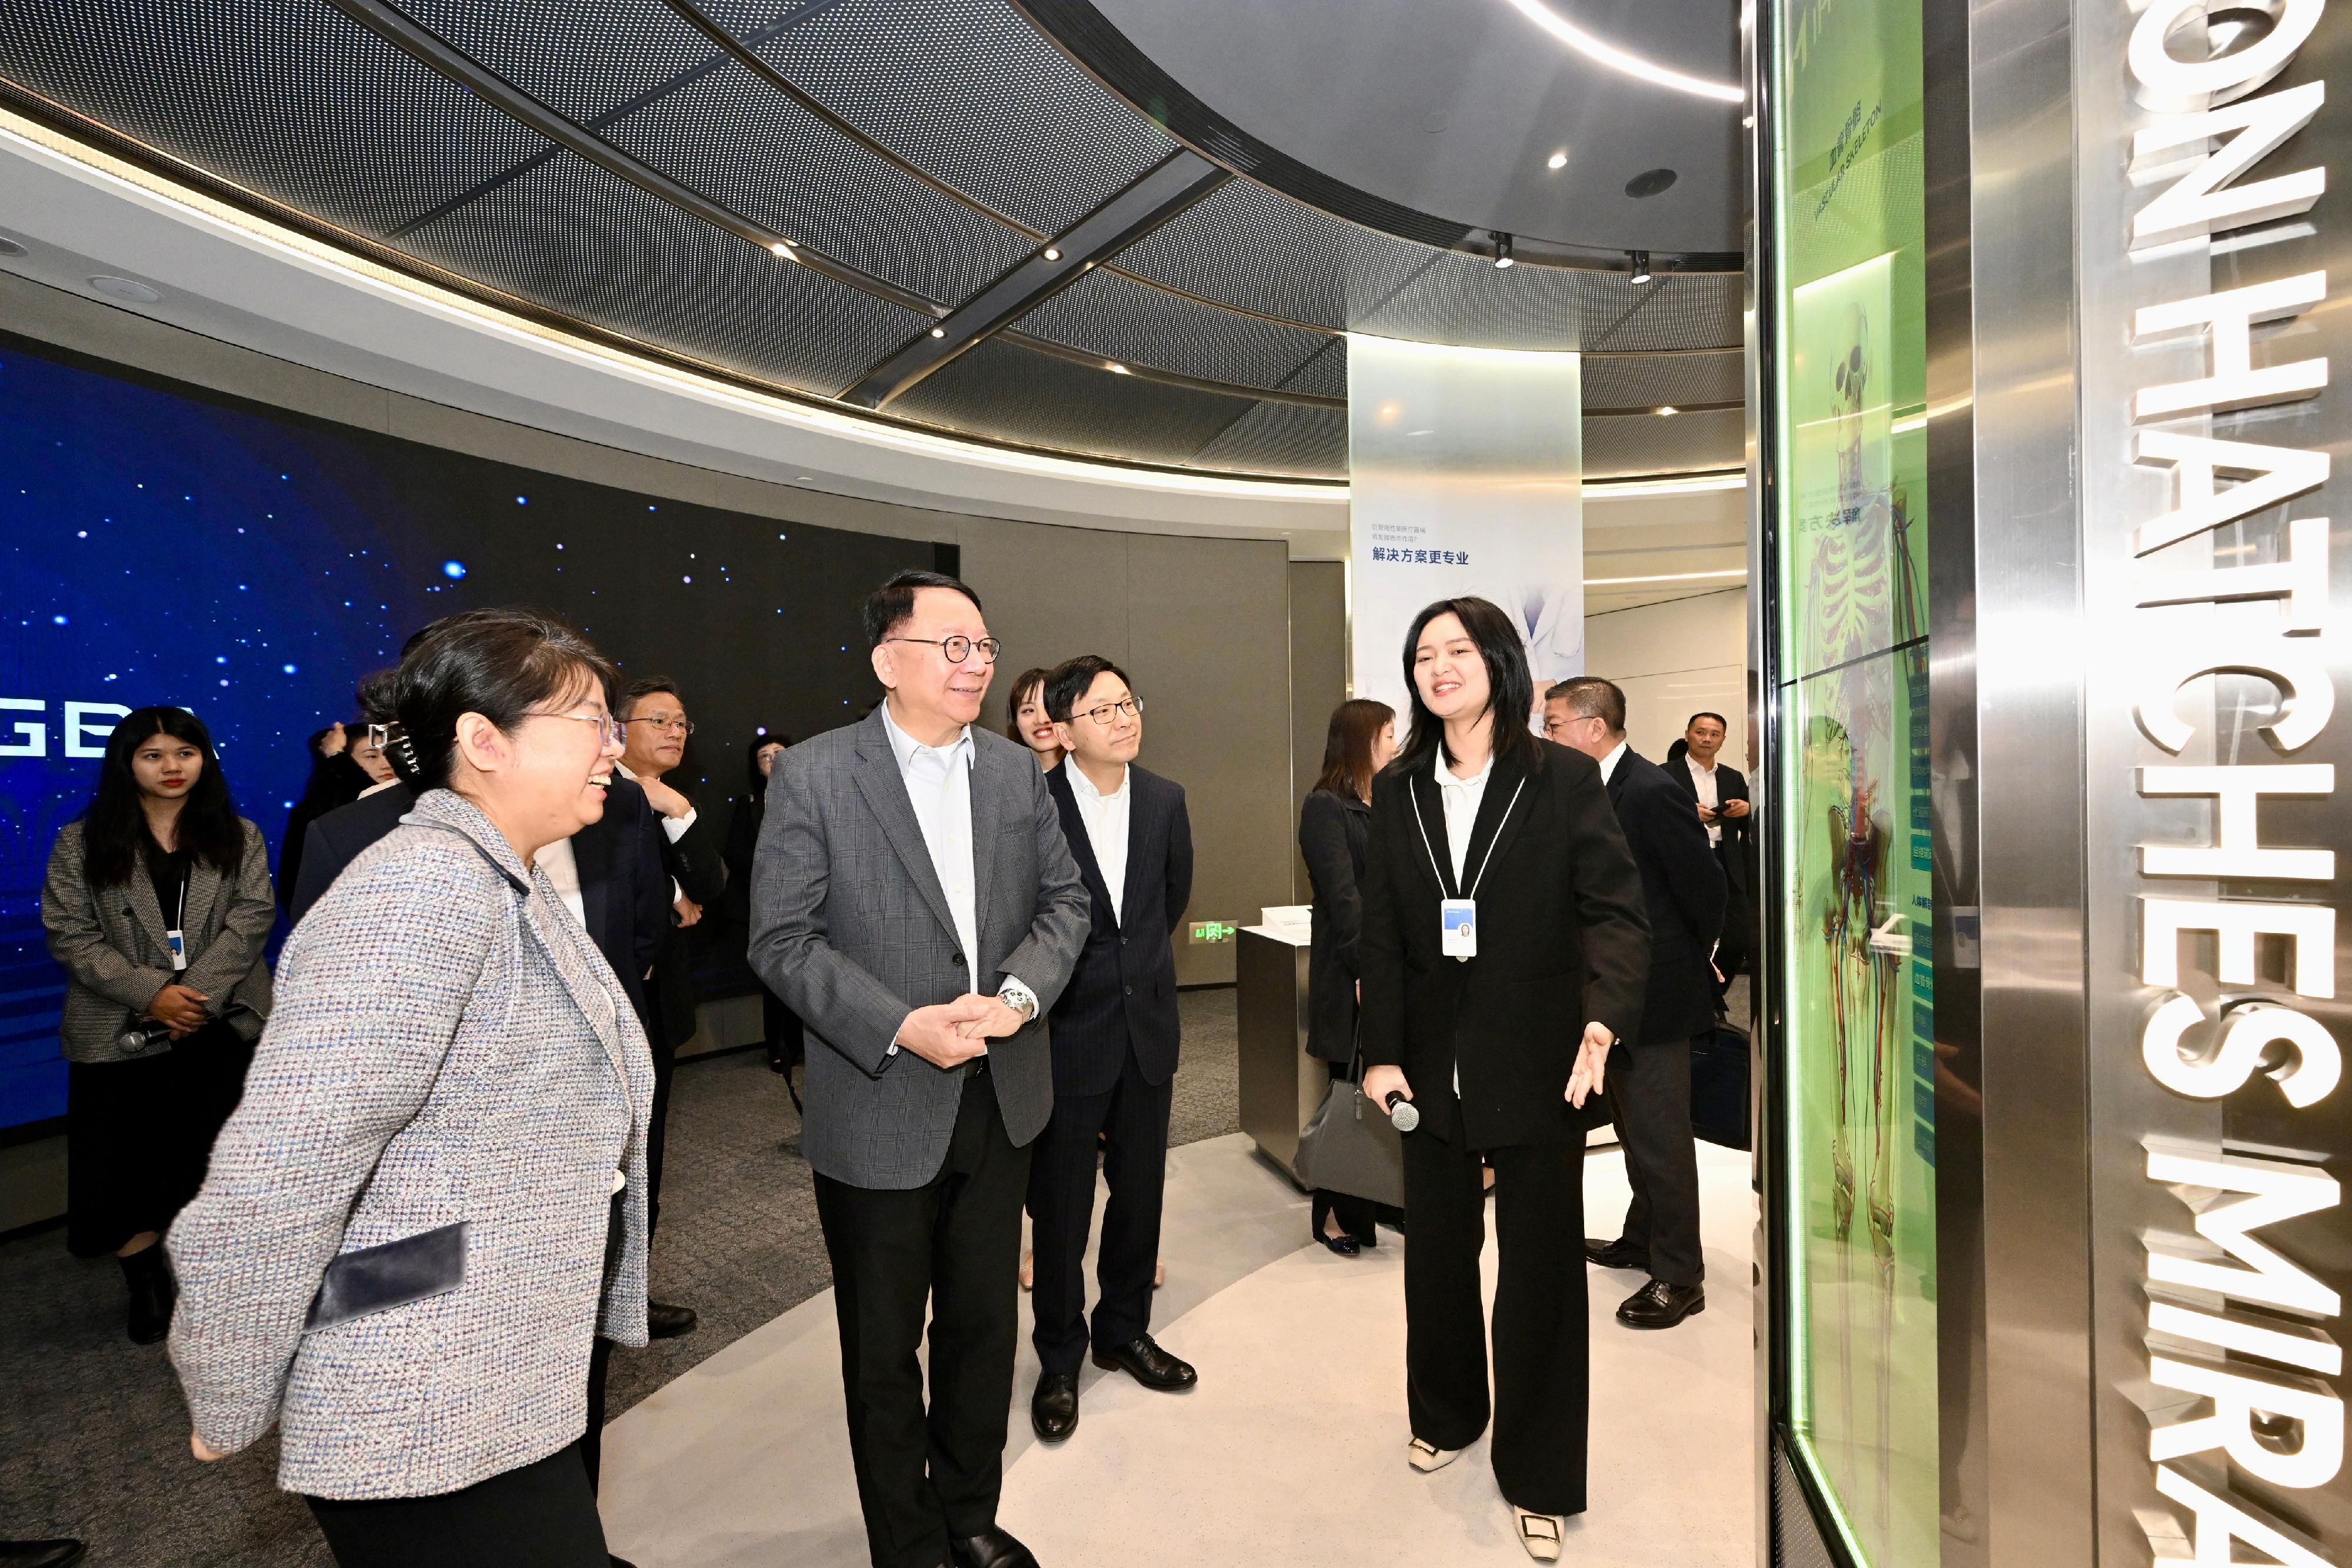 The Chief Secretary for Administration, Mr Chan Kwok-ki, arrived in Guangzhou today (January 8) to begin his visit to Mainland cities of the Guangdong-Hong Kong-Macao Greater Bay Area (GBA). Photo shows Mr Chan (second left) visiting the Innovation Center of High-performance Medical Device Industry in the GBA to learn about its good progress to strengthen independent research and development capability and industrialisation of high-tech, high-precision and cutting-edge medical devices.